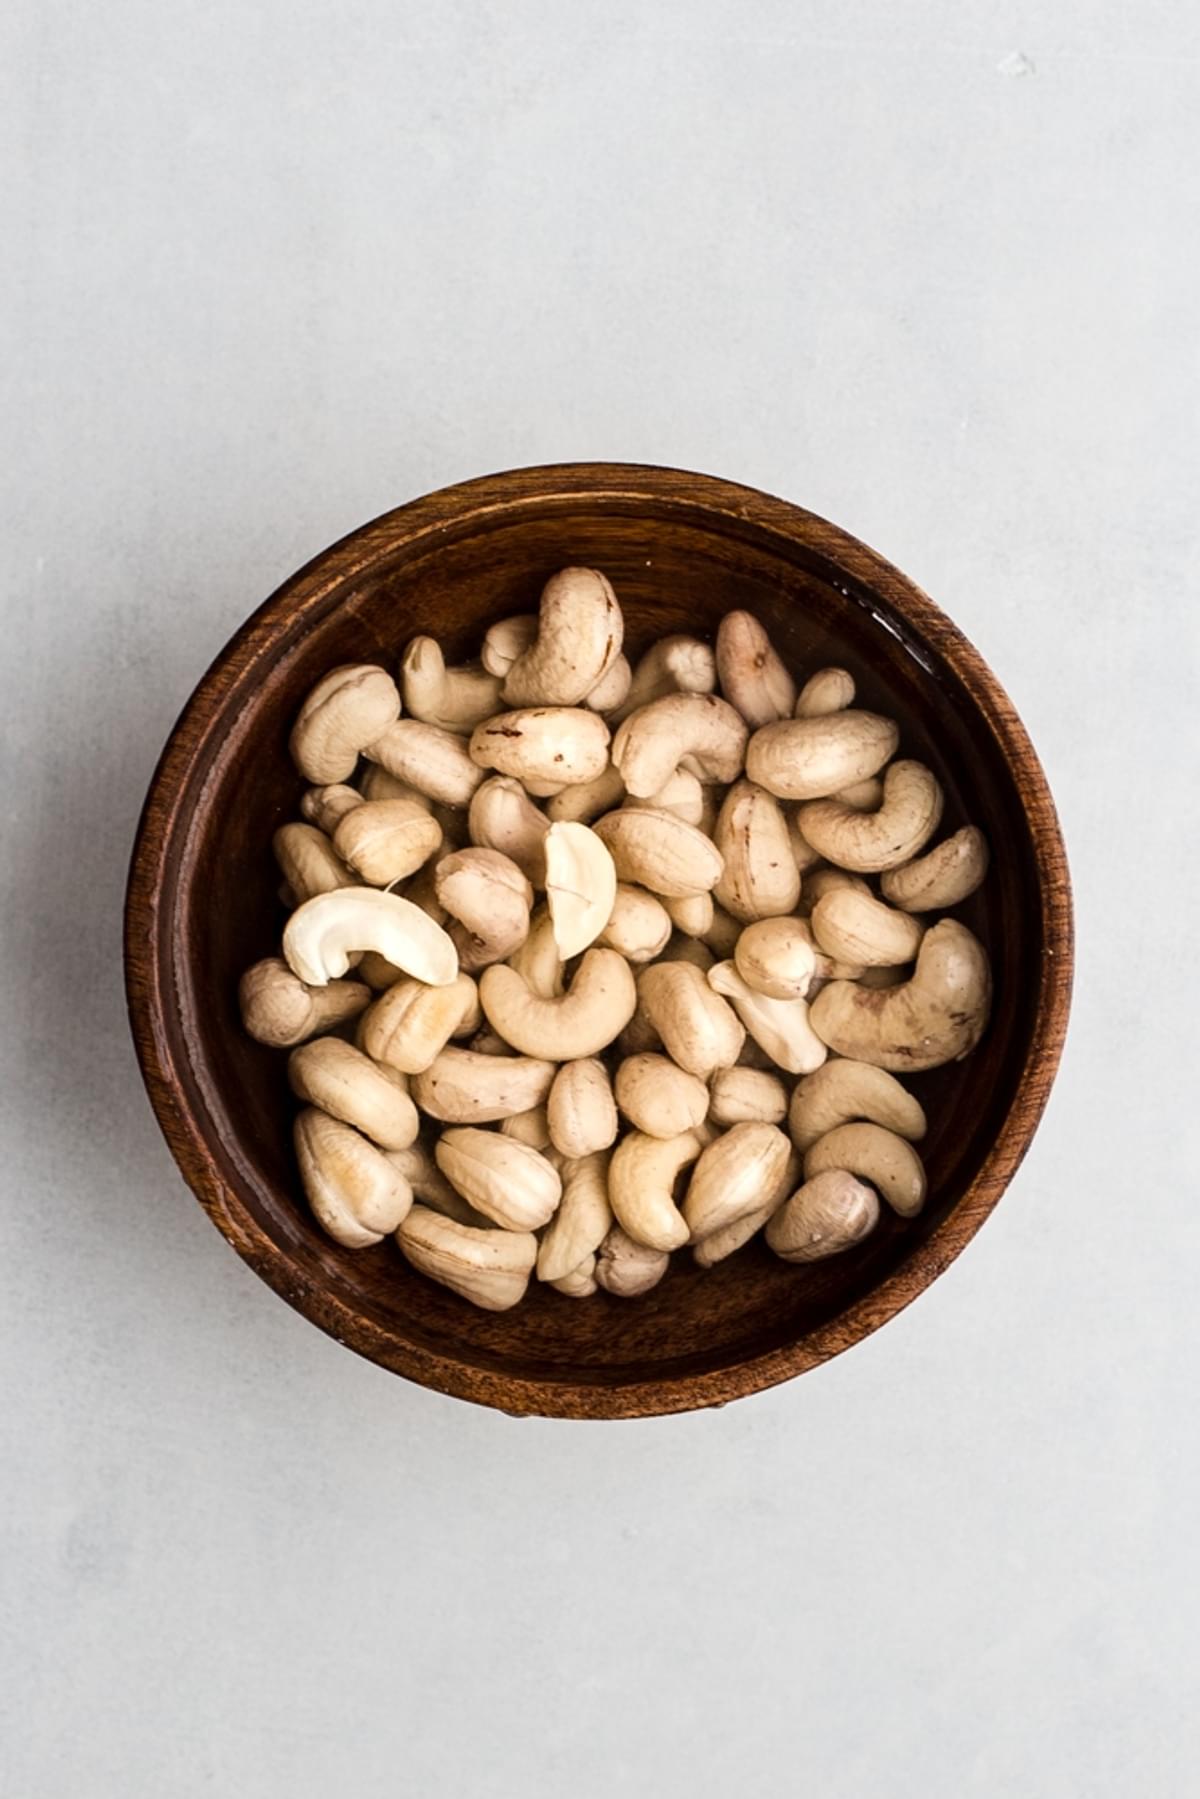 cashews soaking in a bowl of water